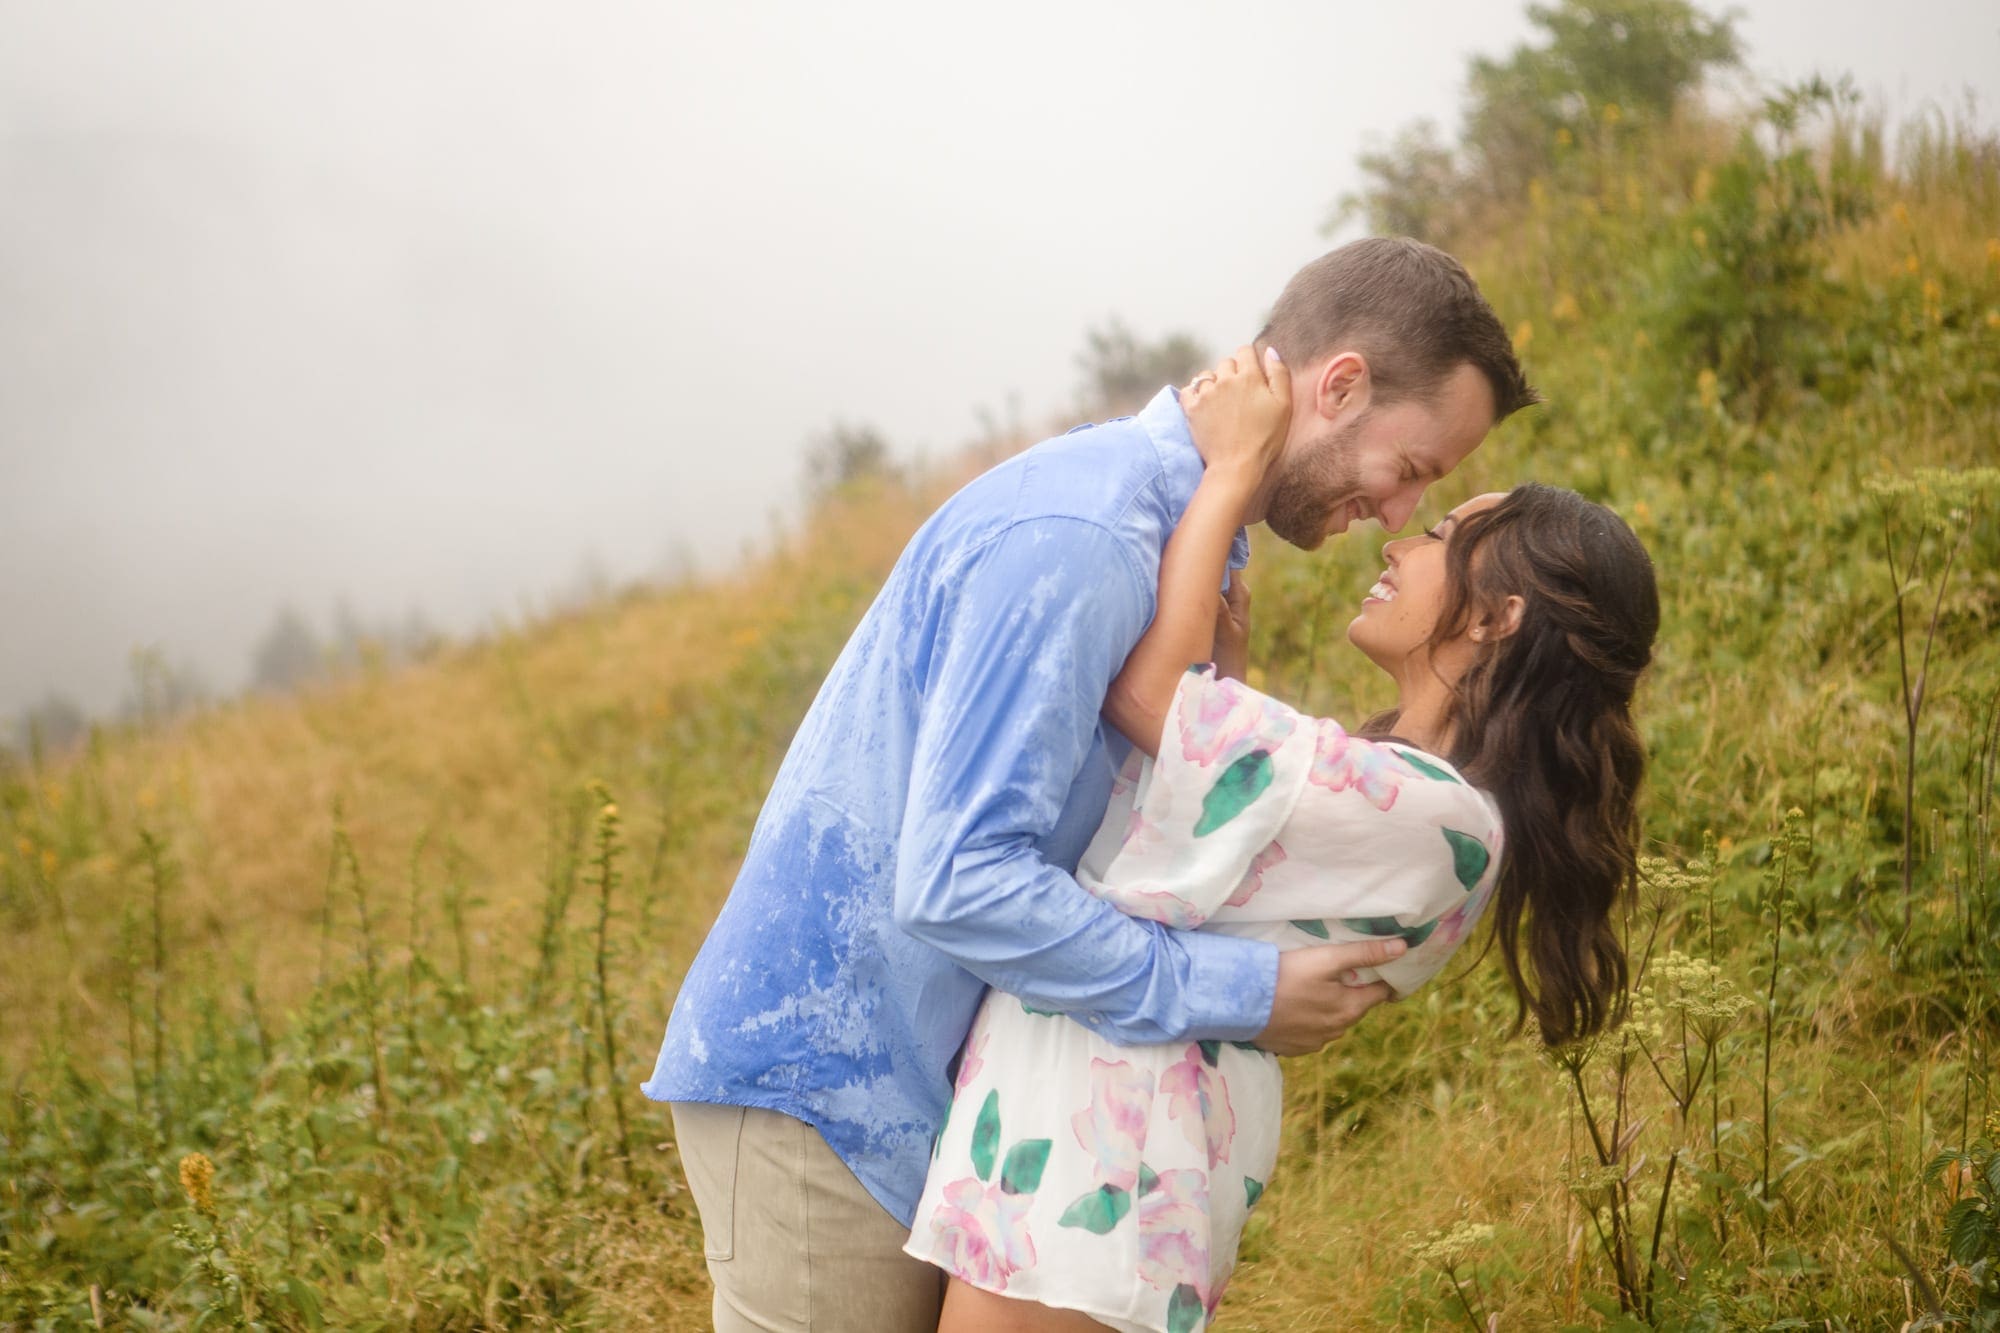 Couple embracing in mountain's valley on foggy day near Asheville North Carolina photography done by Kathy Beaver.